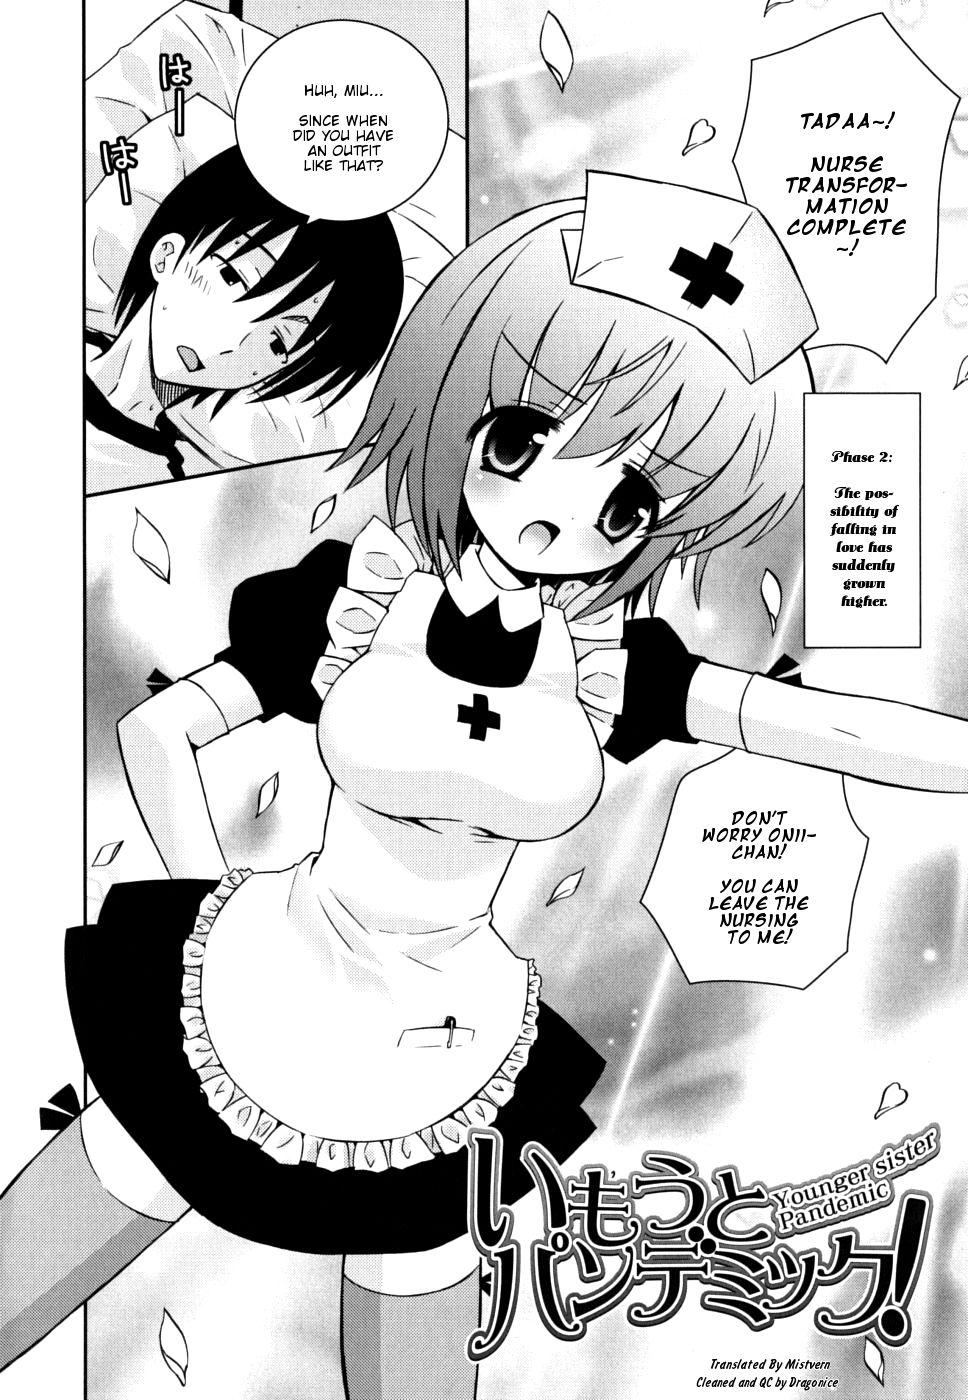 Cumming Imouto Pandemic! - Younger sister Pandemic Swing - Page 2